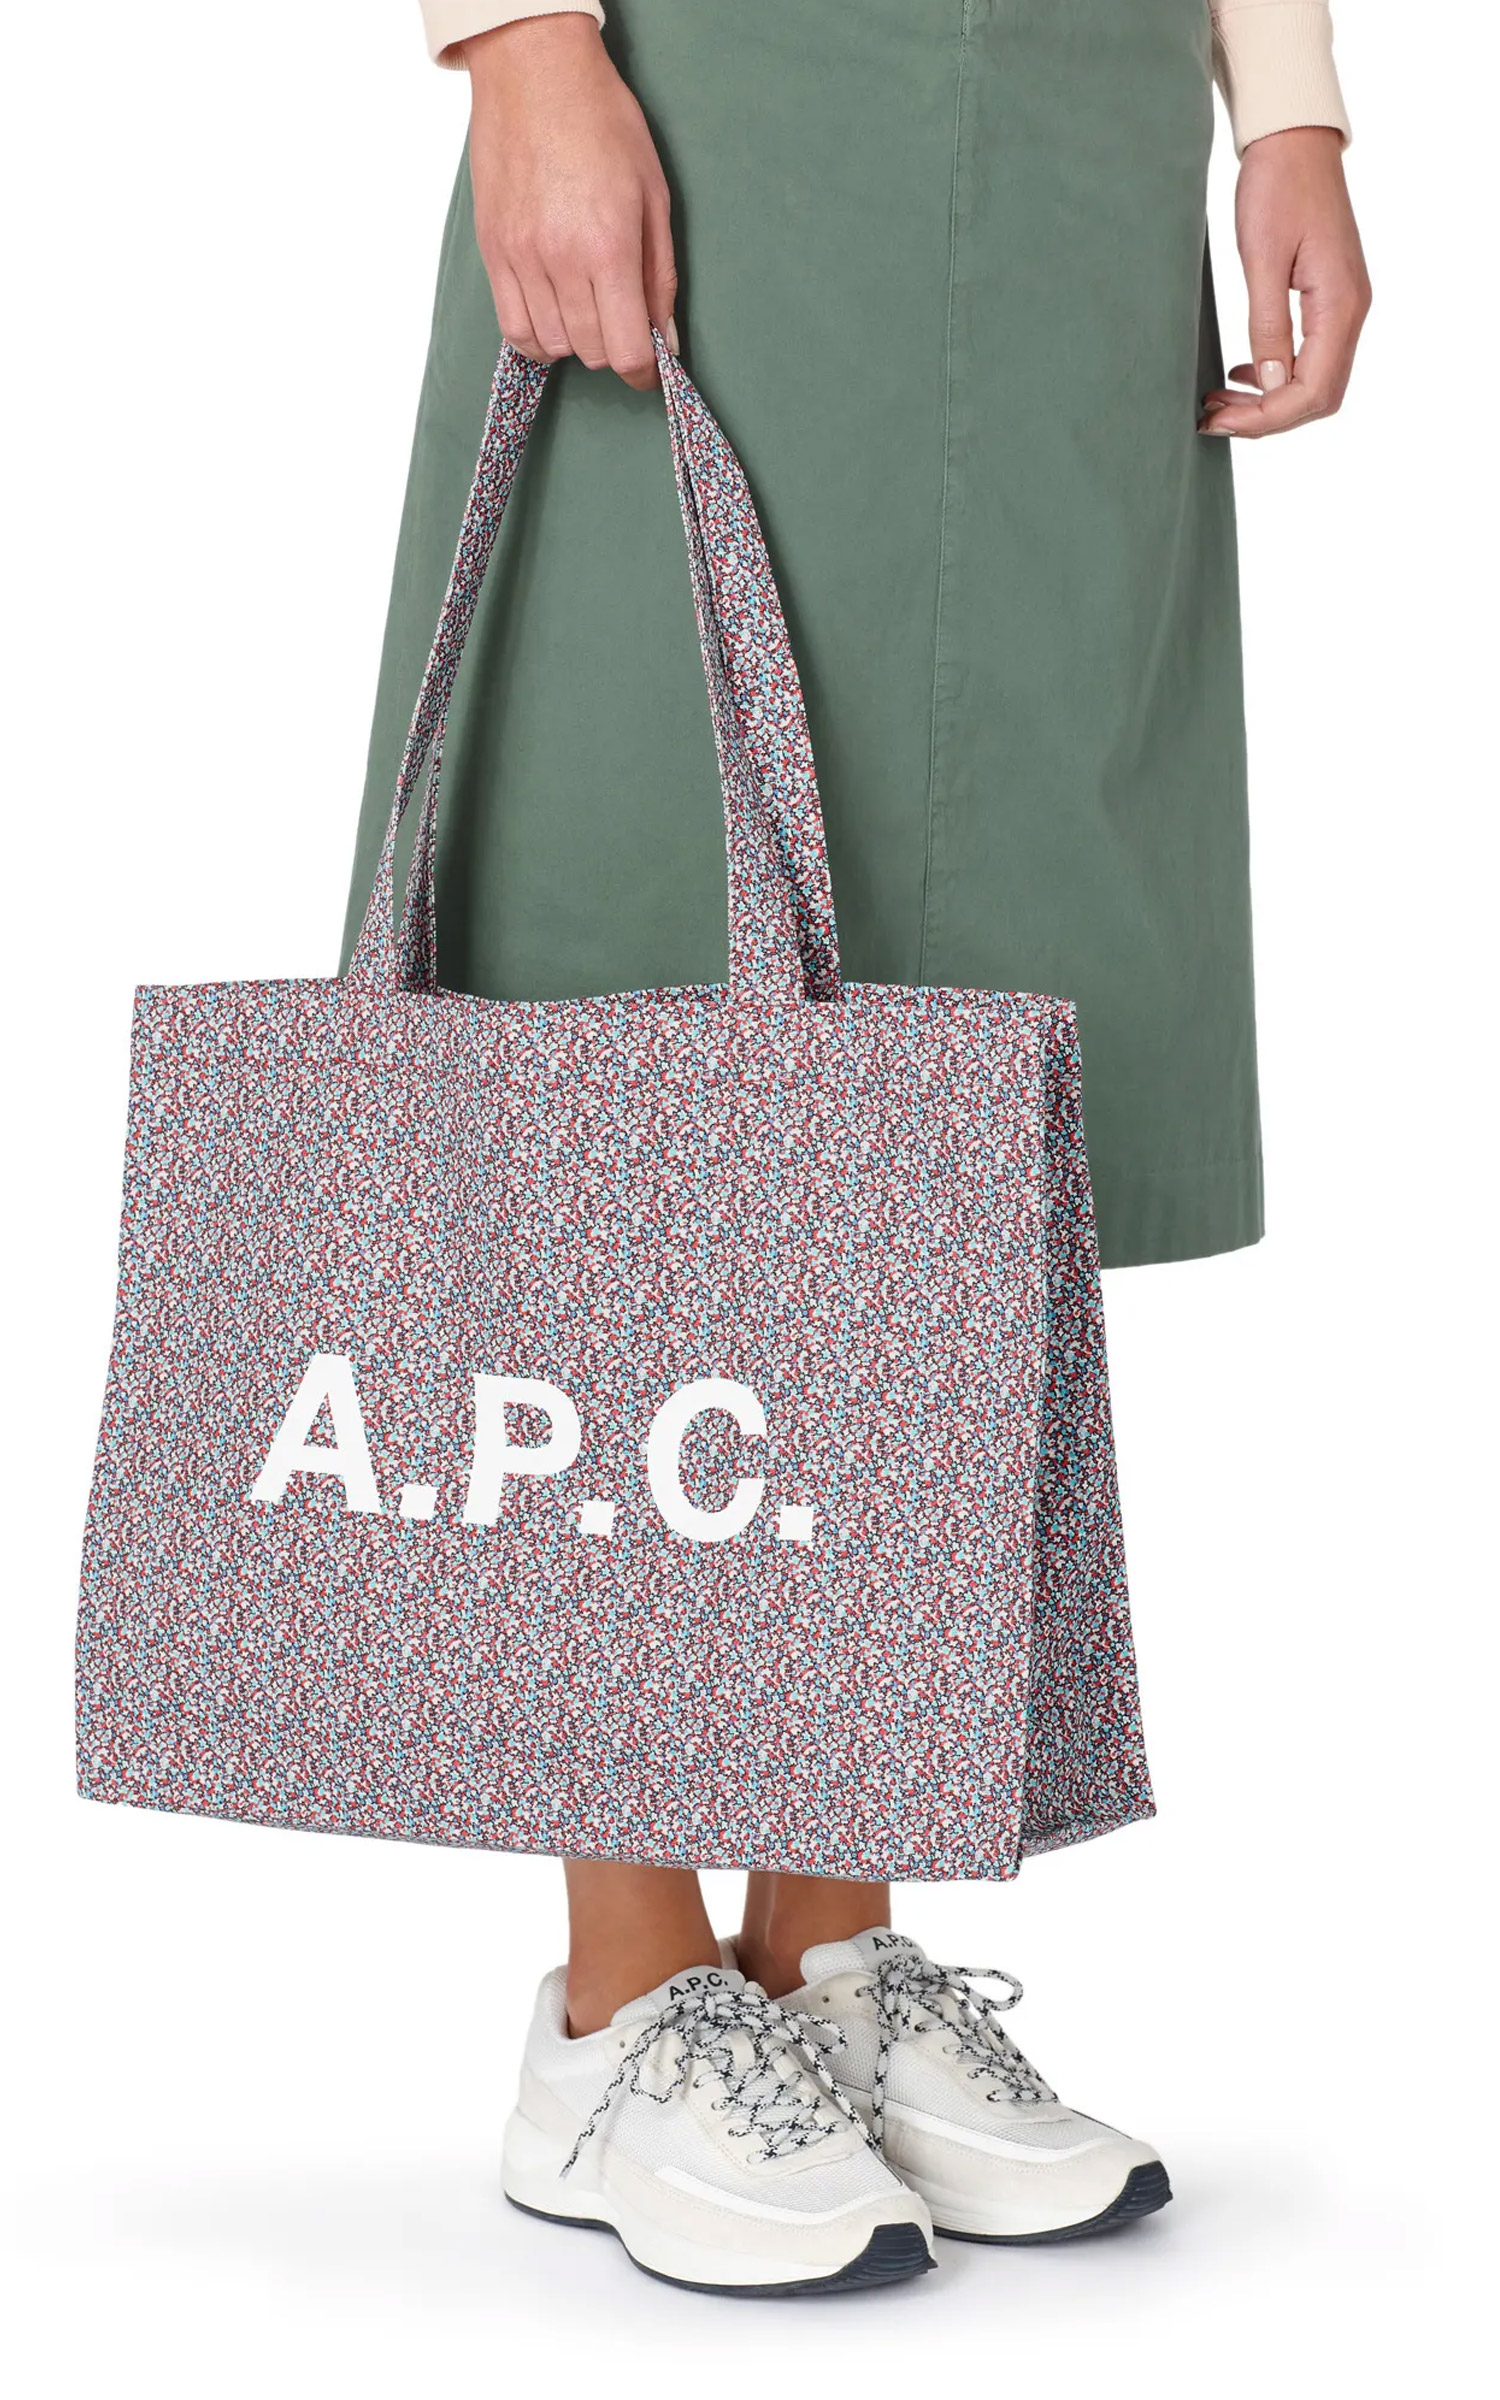 A.P.C. Diane Shopping Bag Liberty Printed Canvas Red | Cultizm